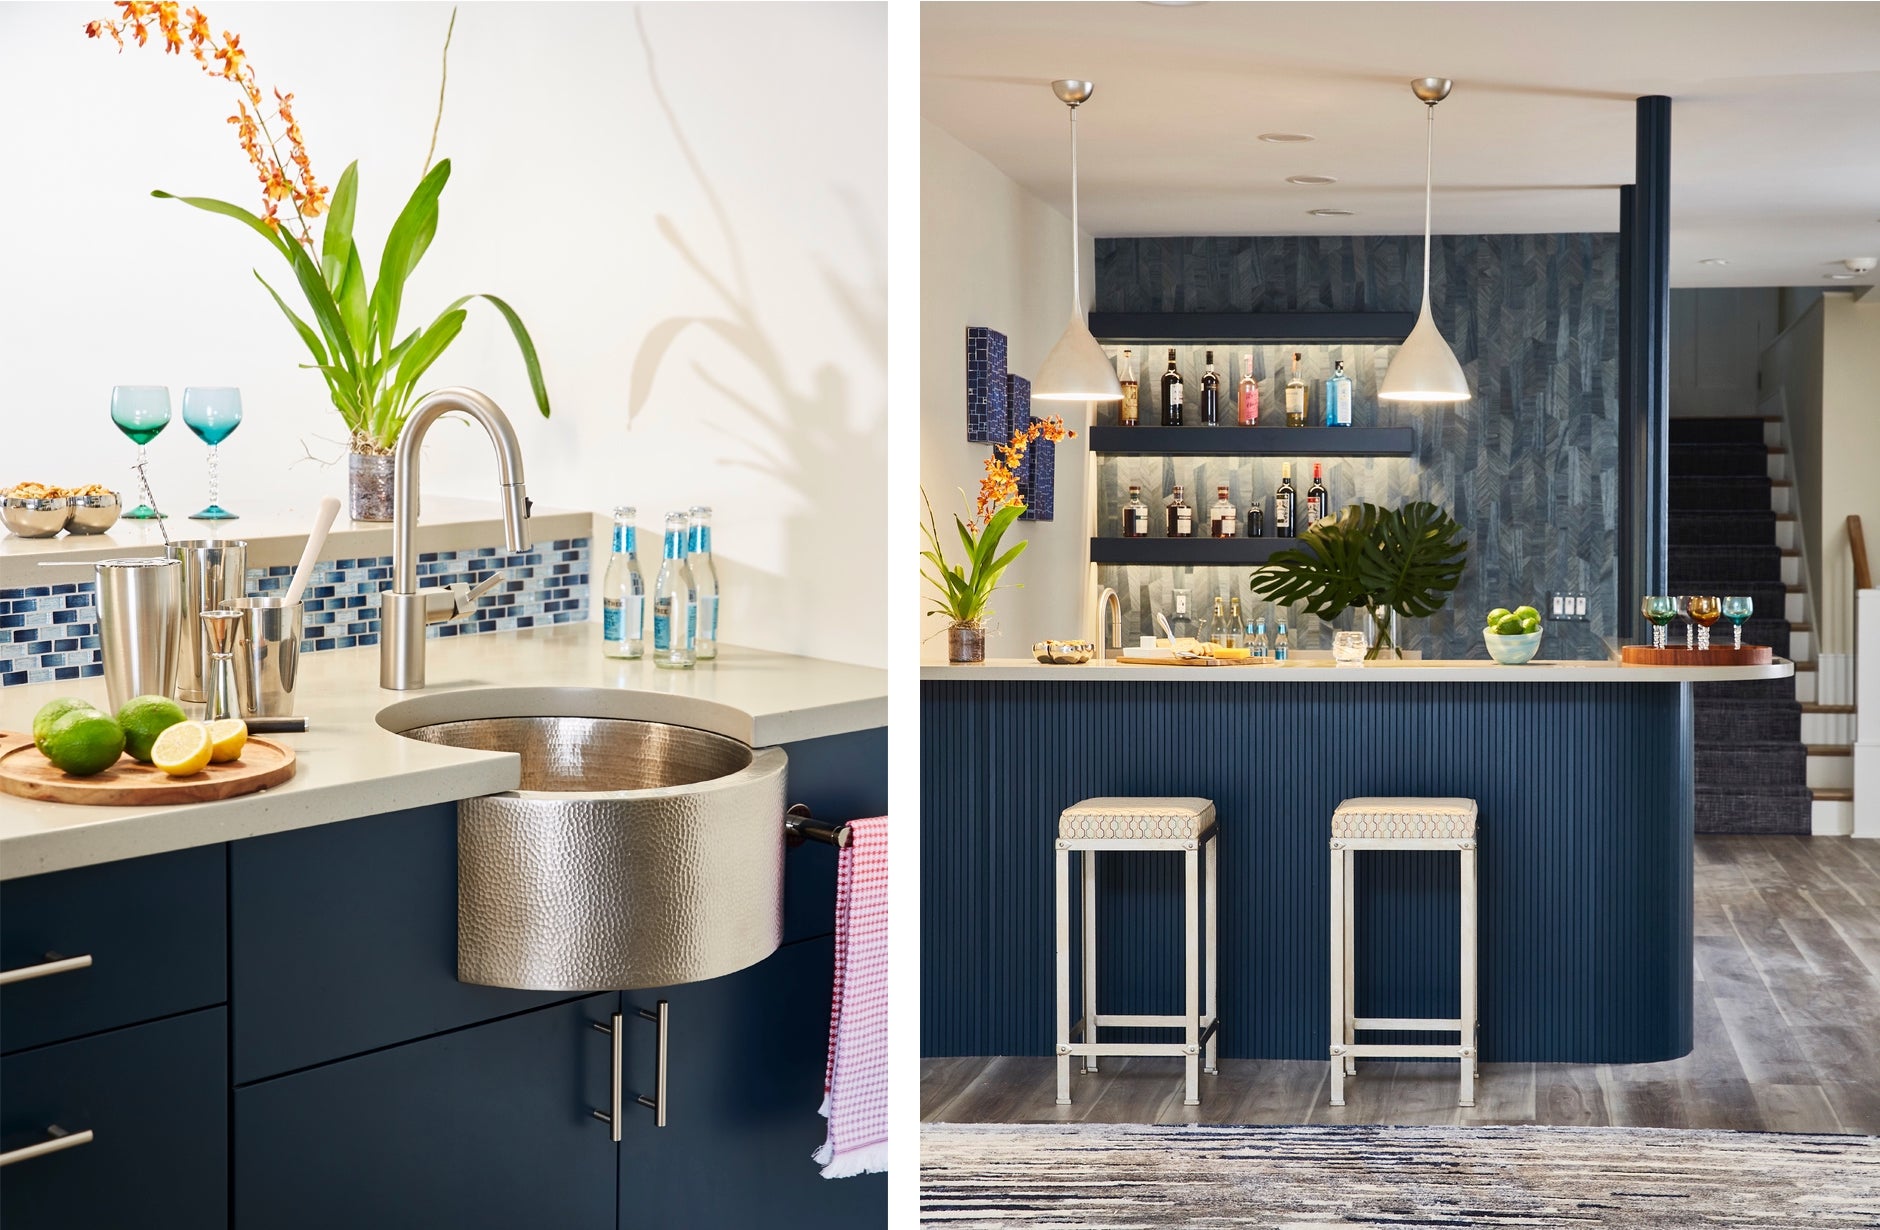 A detail shot of a home bar with a rounded farmer's sink that just out from the counter. There is a cutting board with limes and lemons on the counter. At the top of the counter sit two blue wine glasses. The back of the bar is lined with blue-and-white tile. The paired photo is of the room itself and shows two stools, a navy blue bar, and a navy blue back wall with open shelving holding liquor bottles.